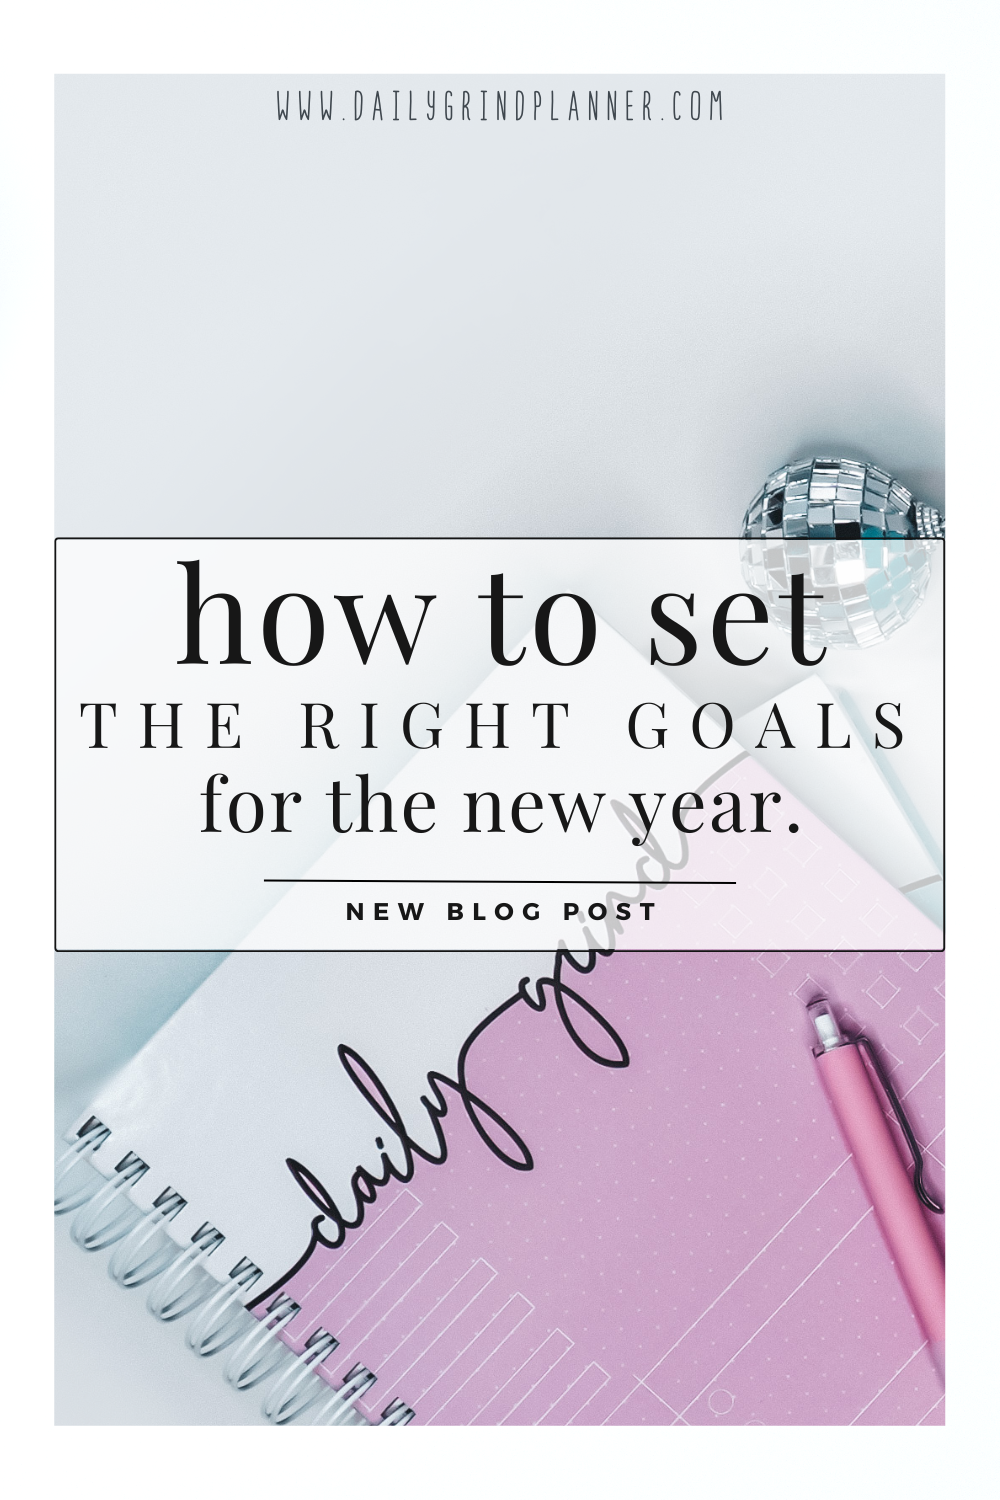 Personal Goal Setting: How to Set The Right Goals for the New Year